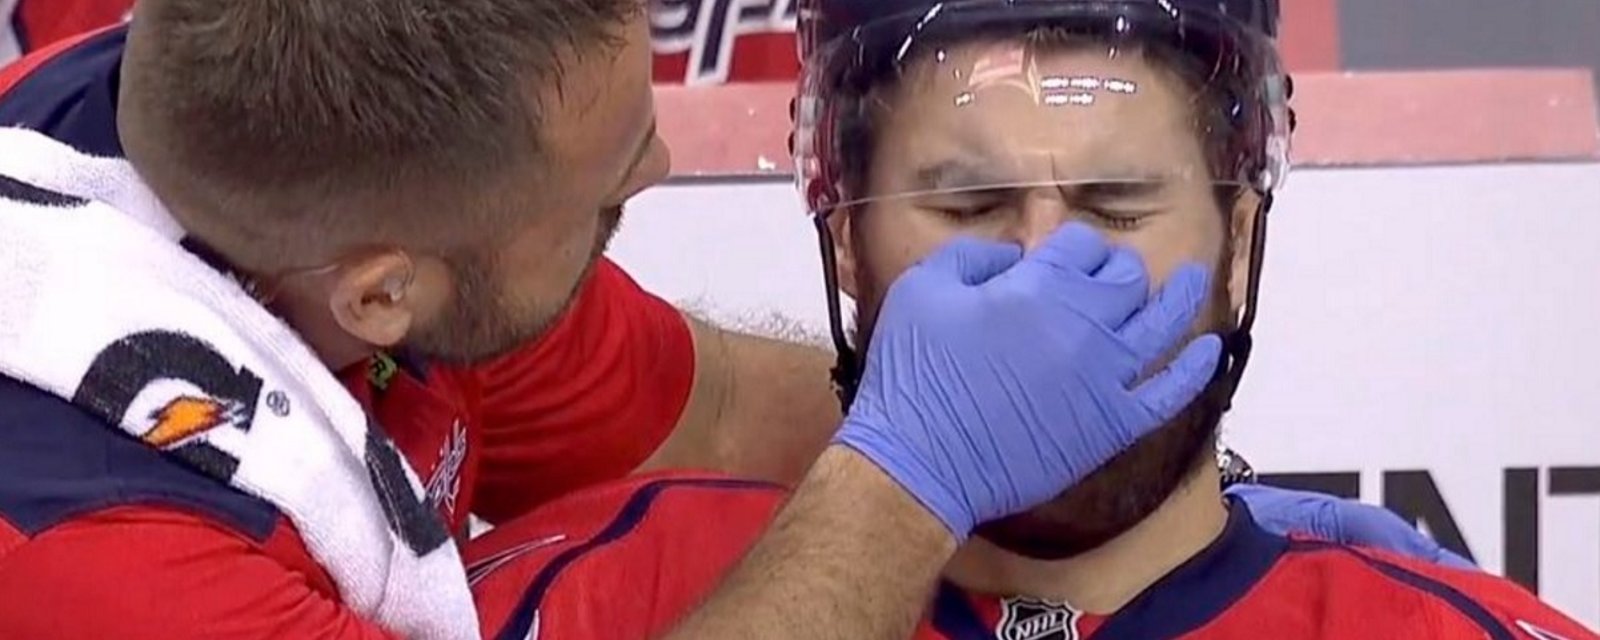 Trainer has to put player's nose back after a huge hit last night.